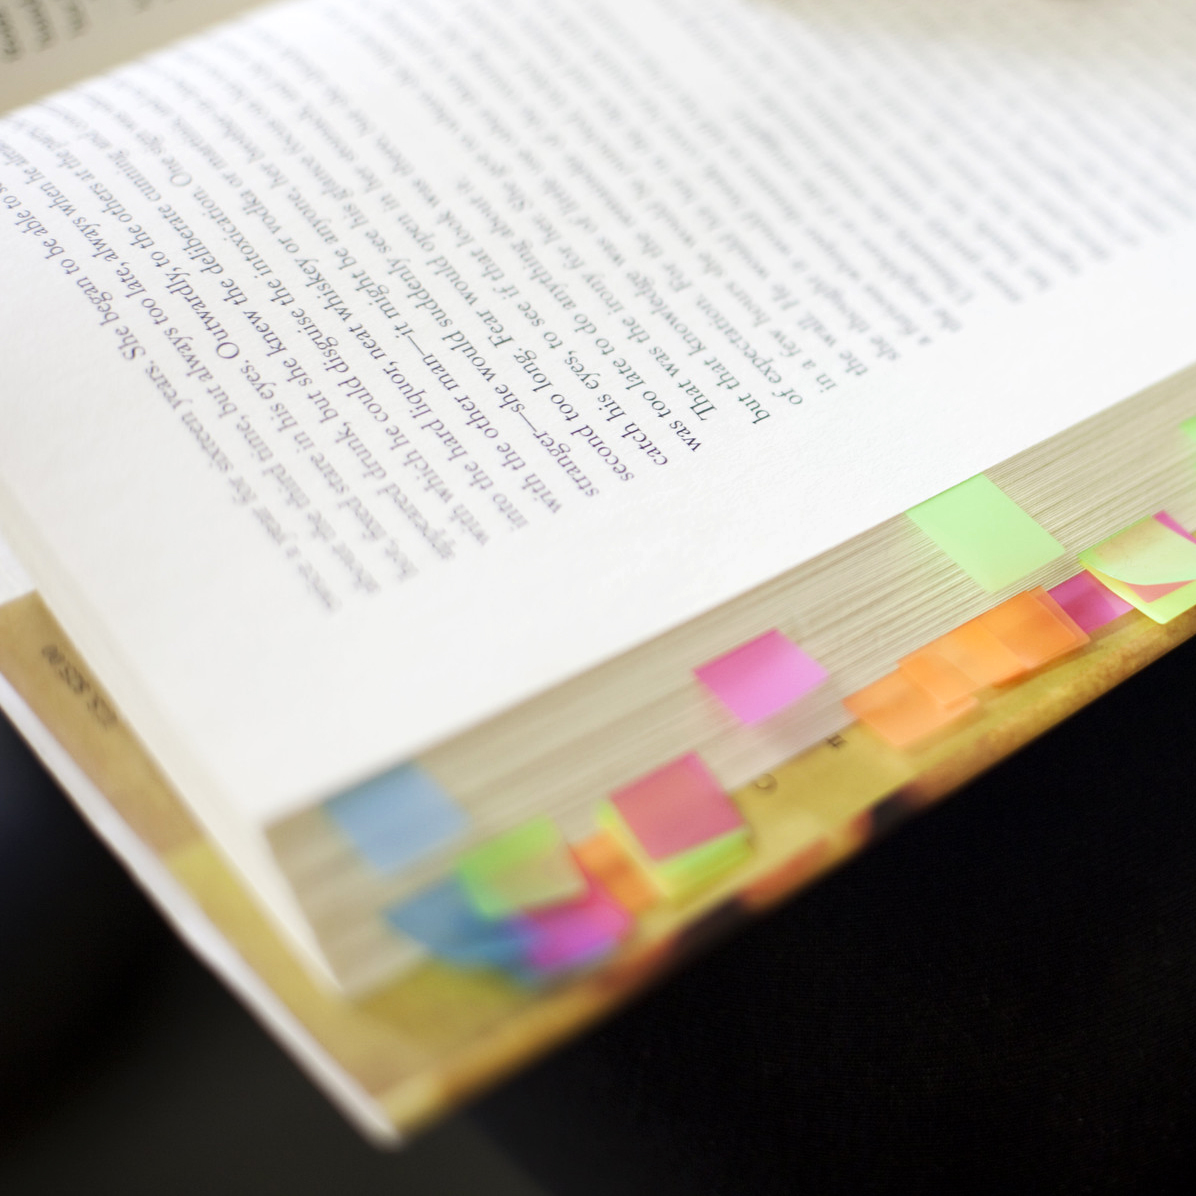 An open book with multicolored sticky tabs.